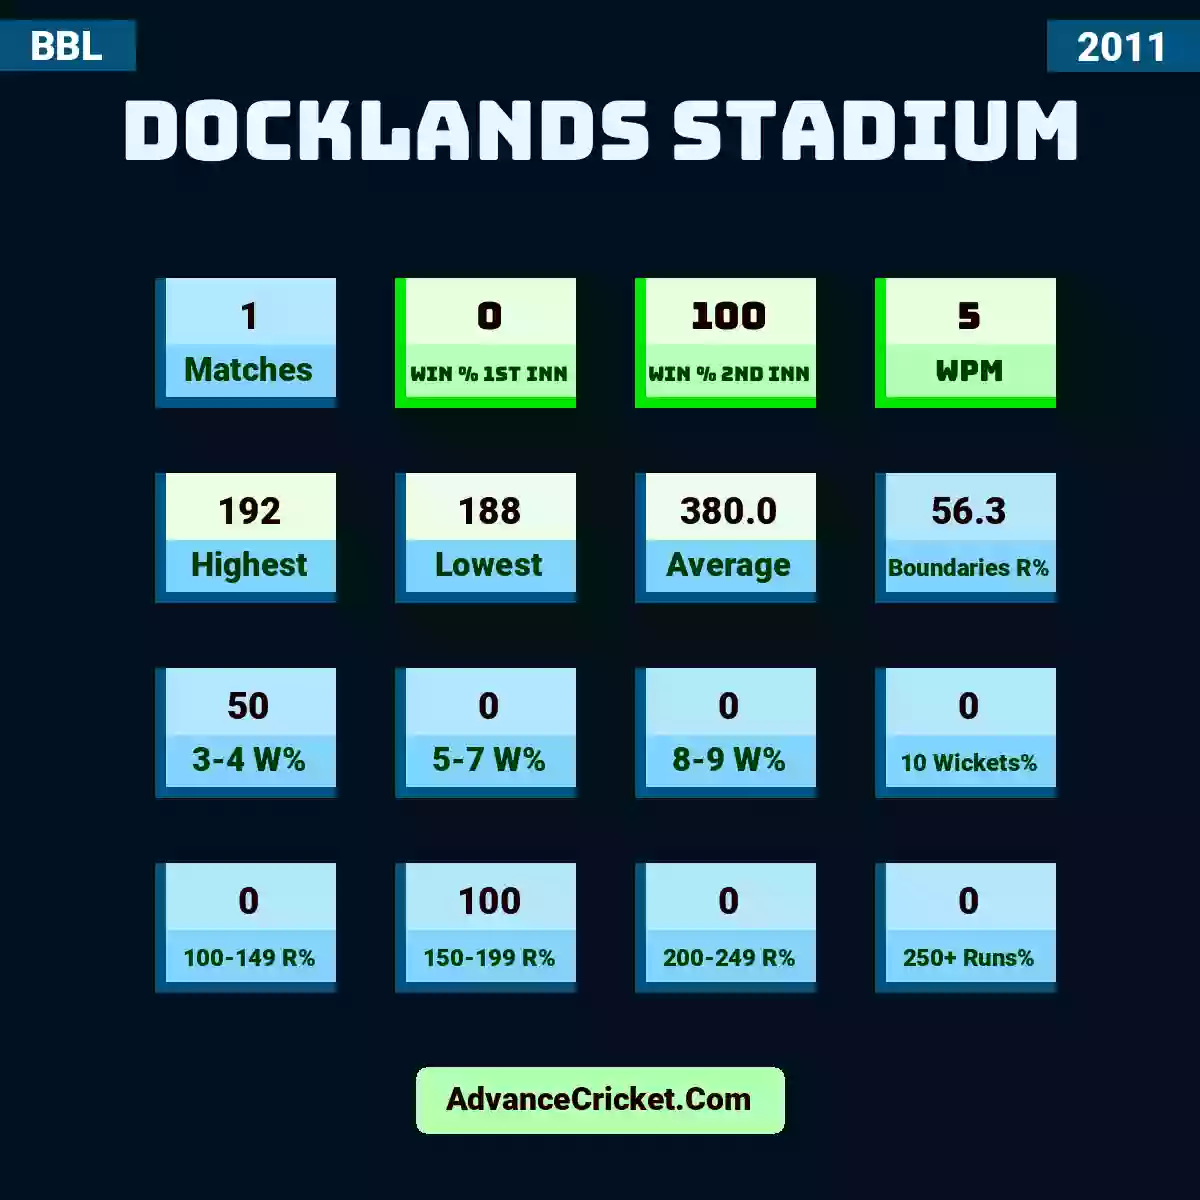 Image showing Docklands Stadium with Matches: 1, Win % 1st Inn: 0, Win % 2nd Inn: 100, WPM: 5, Highest: 192, Lowest: 188, Average: 380.0, Boundaries R%: 56.3, 3-4 W%: 50, 5-7 W%: 0, 8-9 W%: 0, 10 Wickets%: 0, 100-149 R%: 0, 150-199 R%: 100, 200-249 R%: 0, 250+ Runs%: 0.